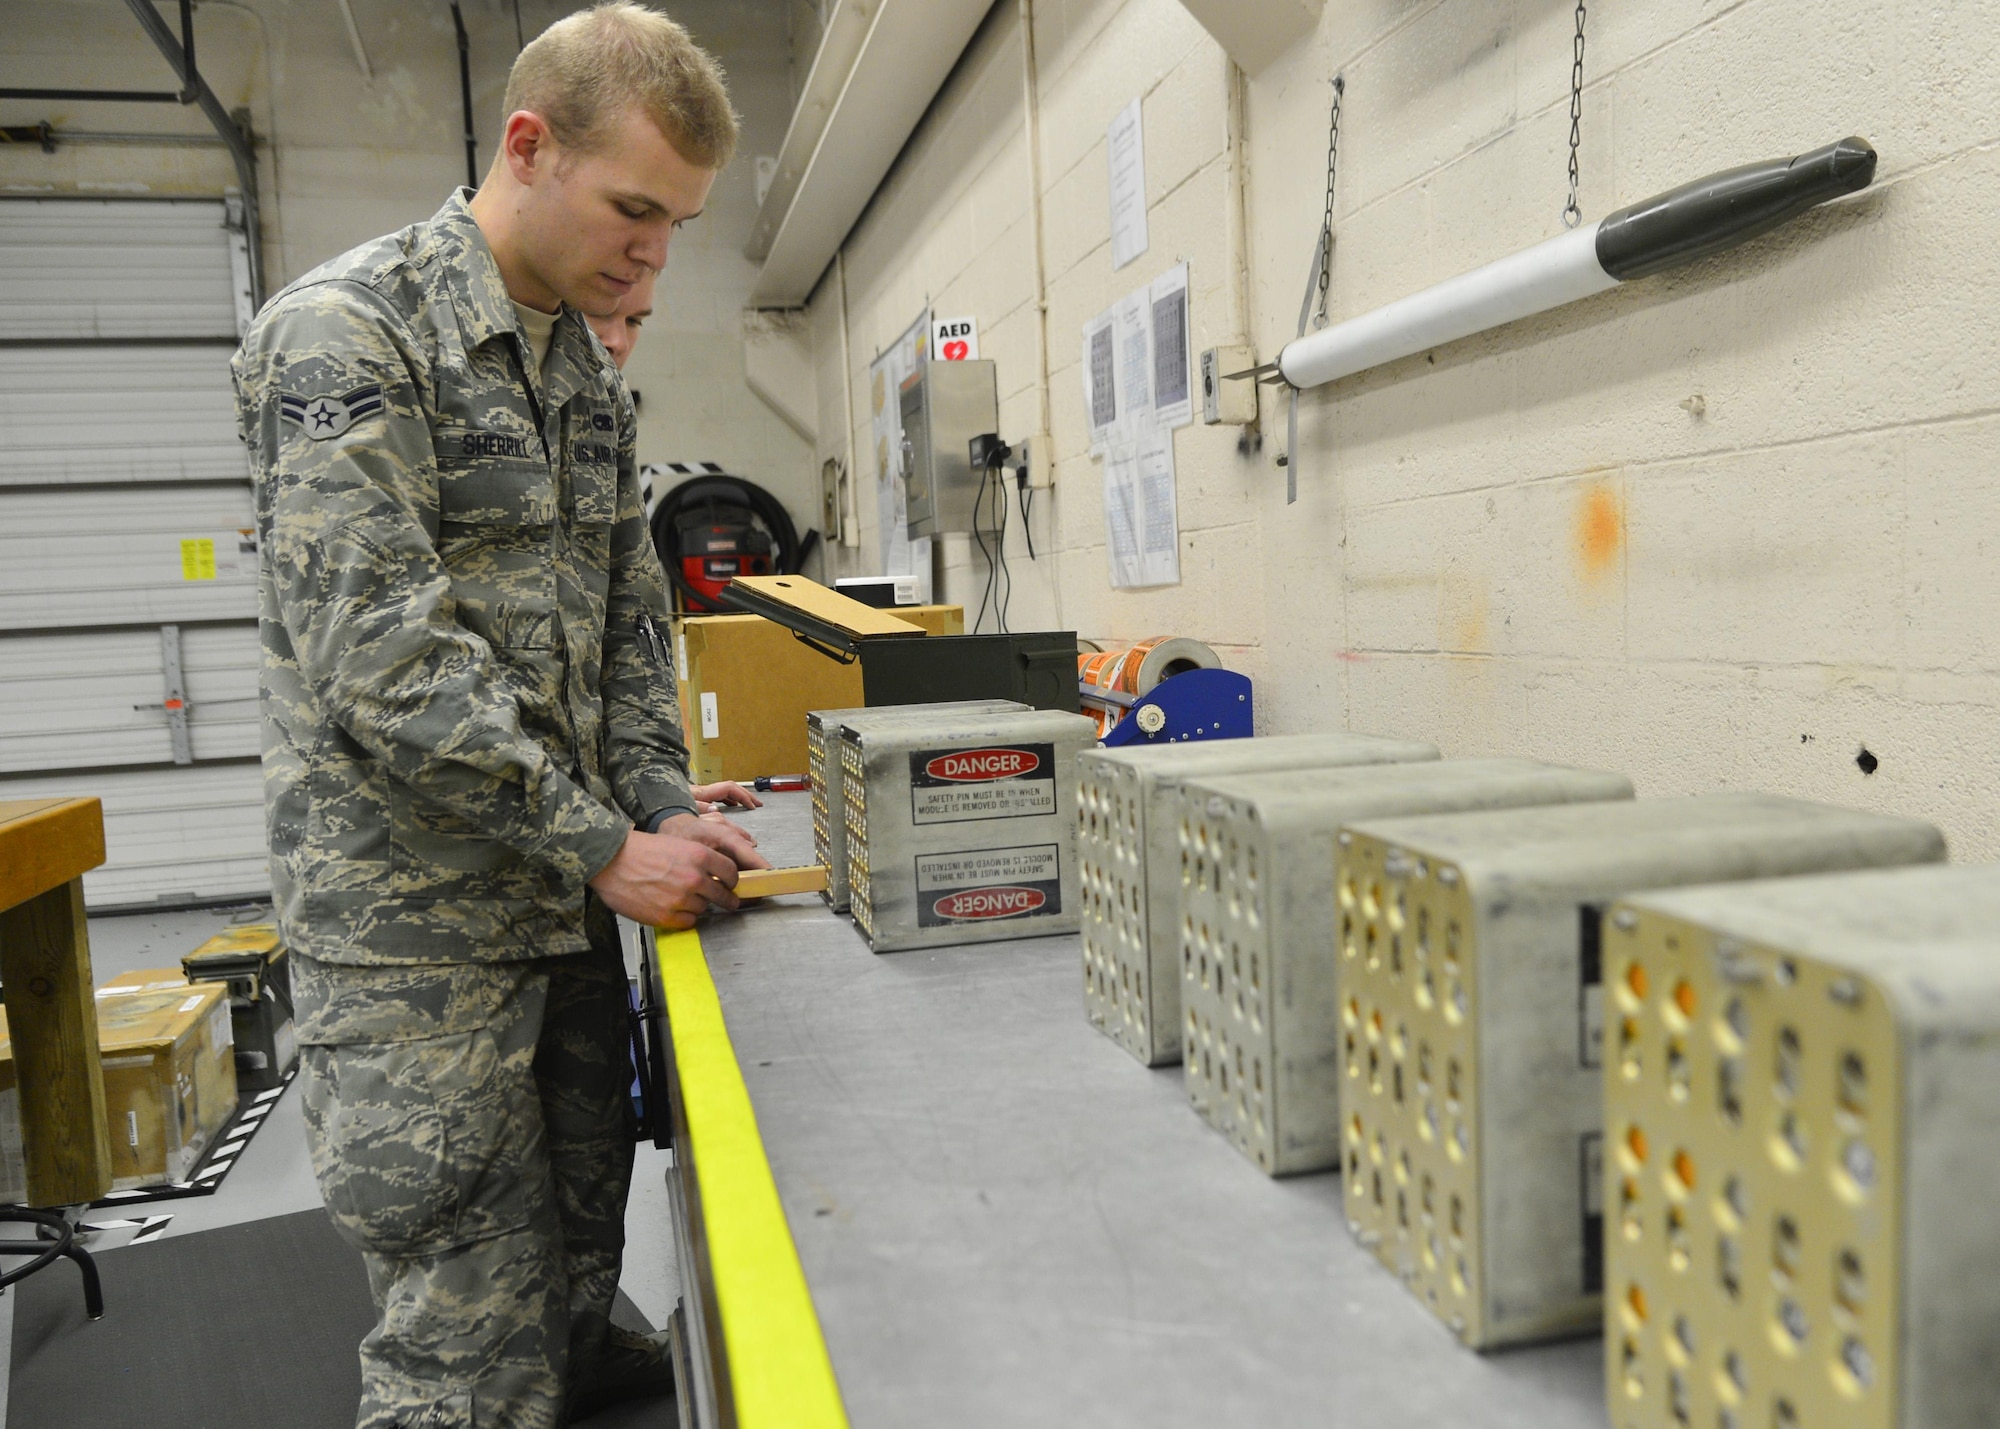 Airman 1st Class Clay Sherrill, 436th Maintenance Squadron munitions storage crew member, loads a flare stick into a magazine box March 28, 2016, at Dover Air Force Base, Del. Once the magazine boxes are fully loaded, they are transported to the flight line to be uploaded onto the aircraft. (U.S. Air Force photo/Senior Airman William Johnson)